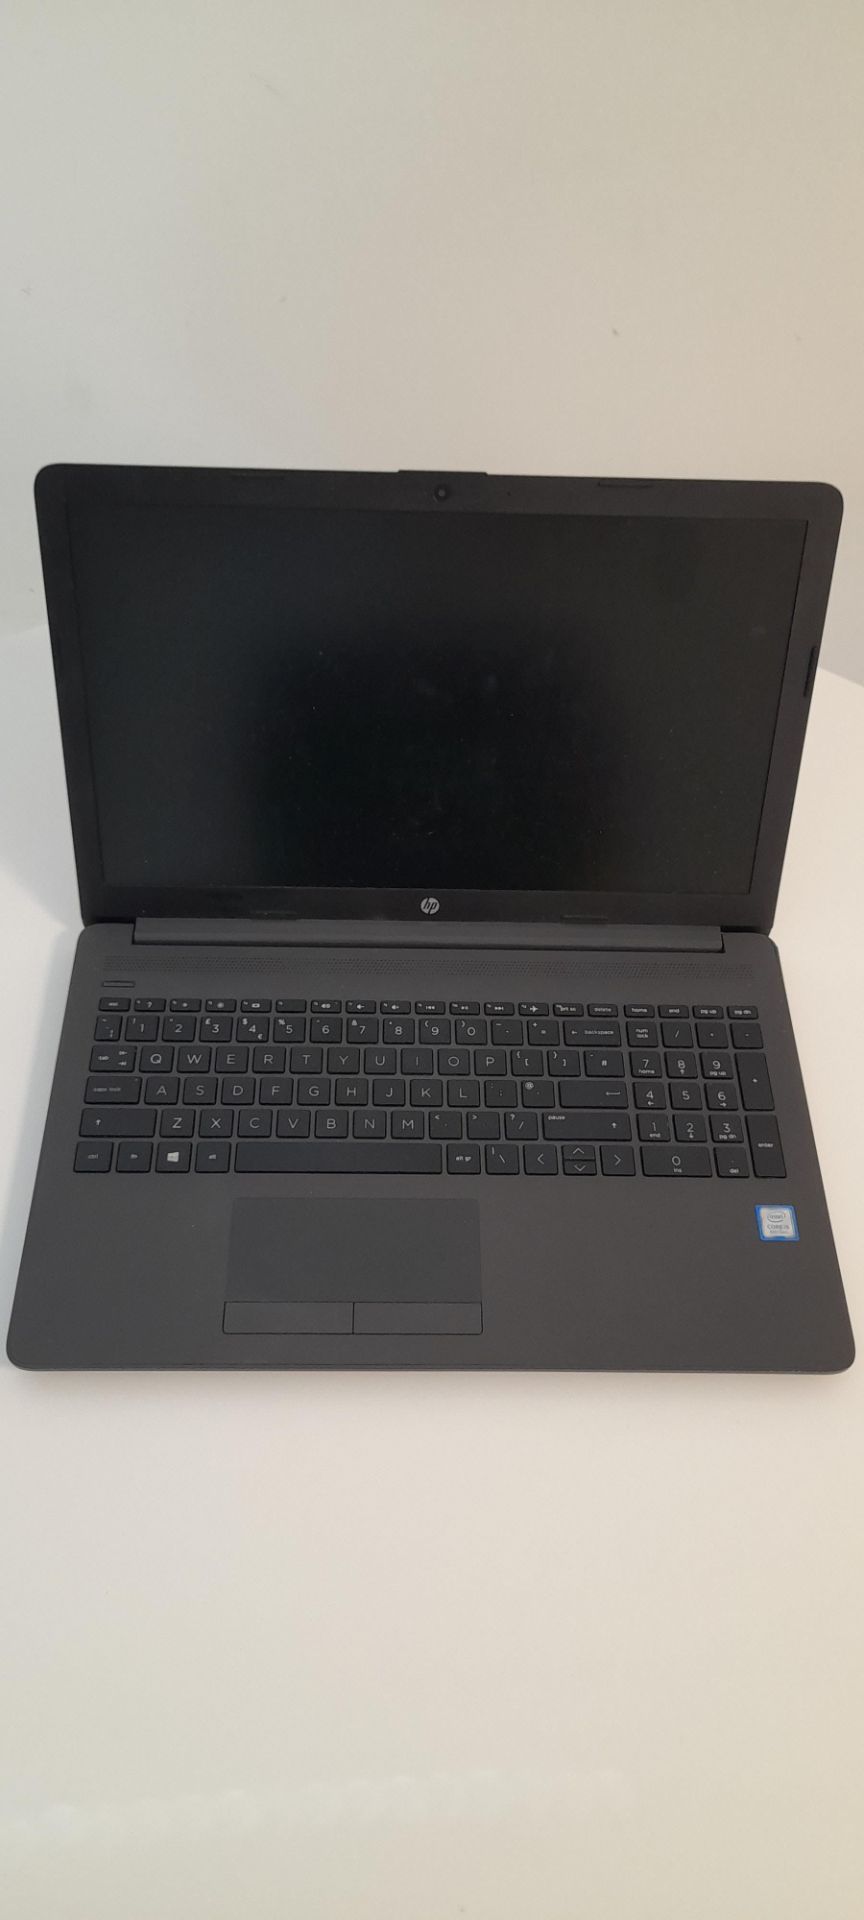 2x HP G250 G7 laptop with intel Core i5, 8th Gen. Collection from Canary Wharf, London, E14 - Image 2 of 15